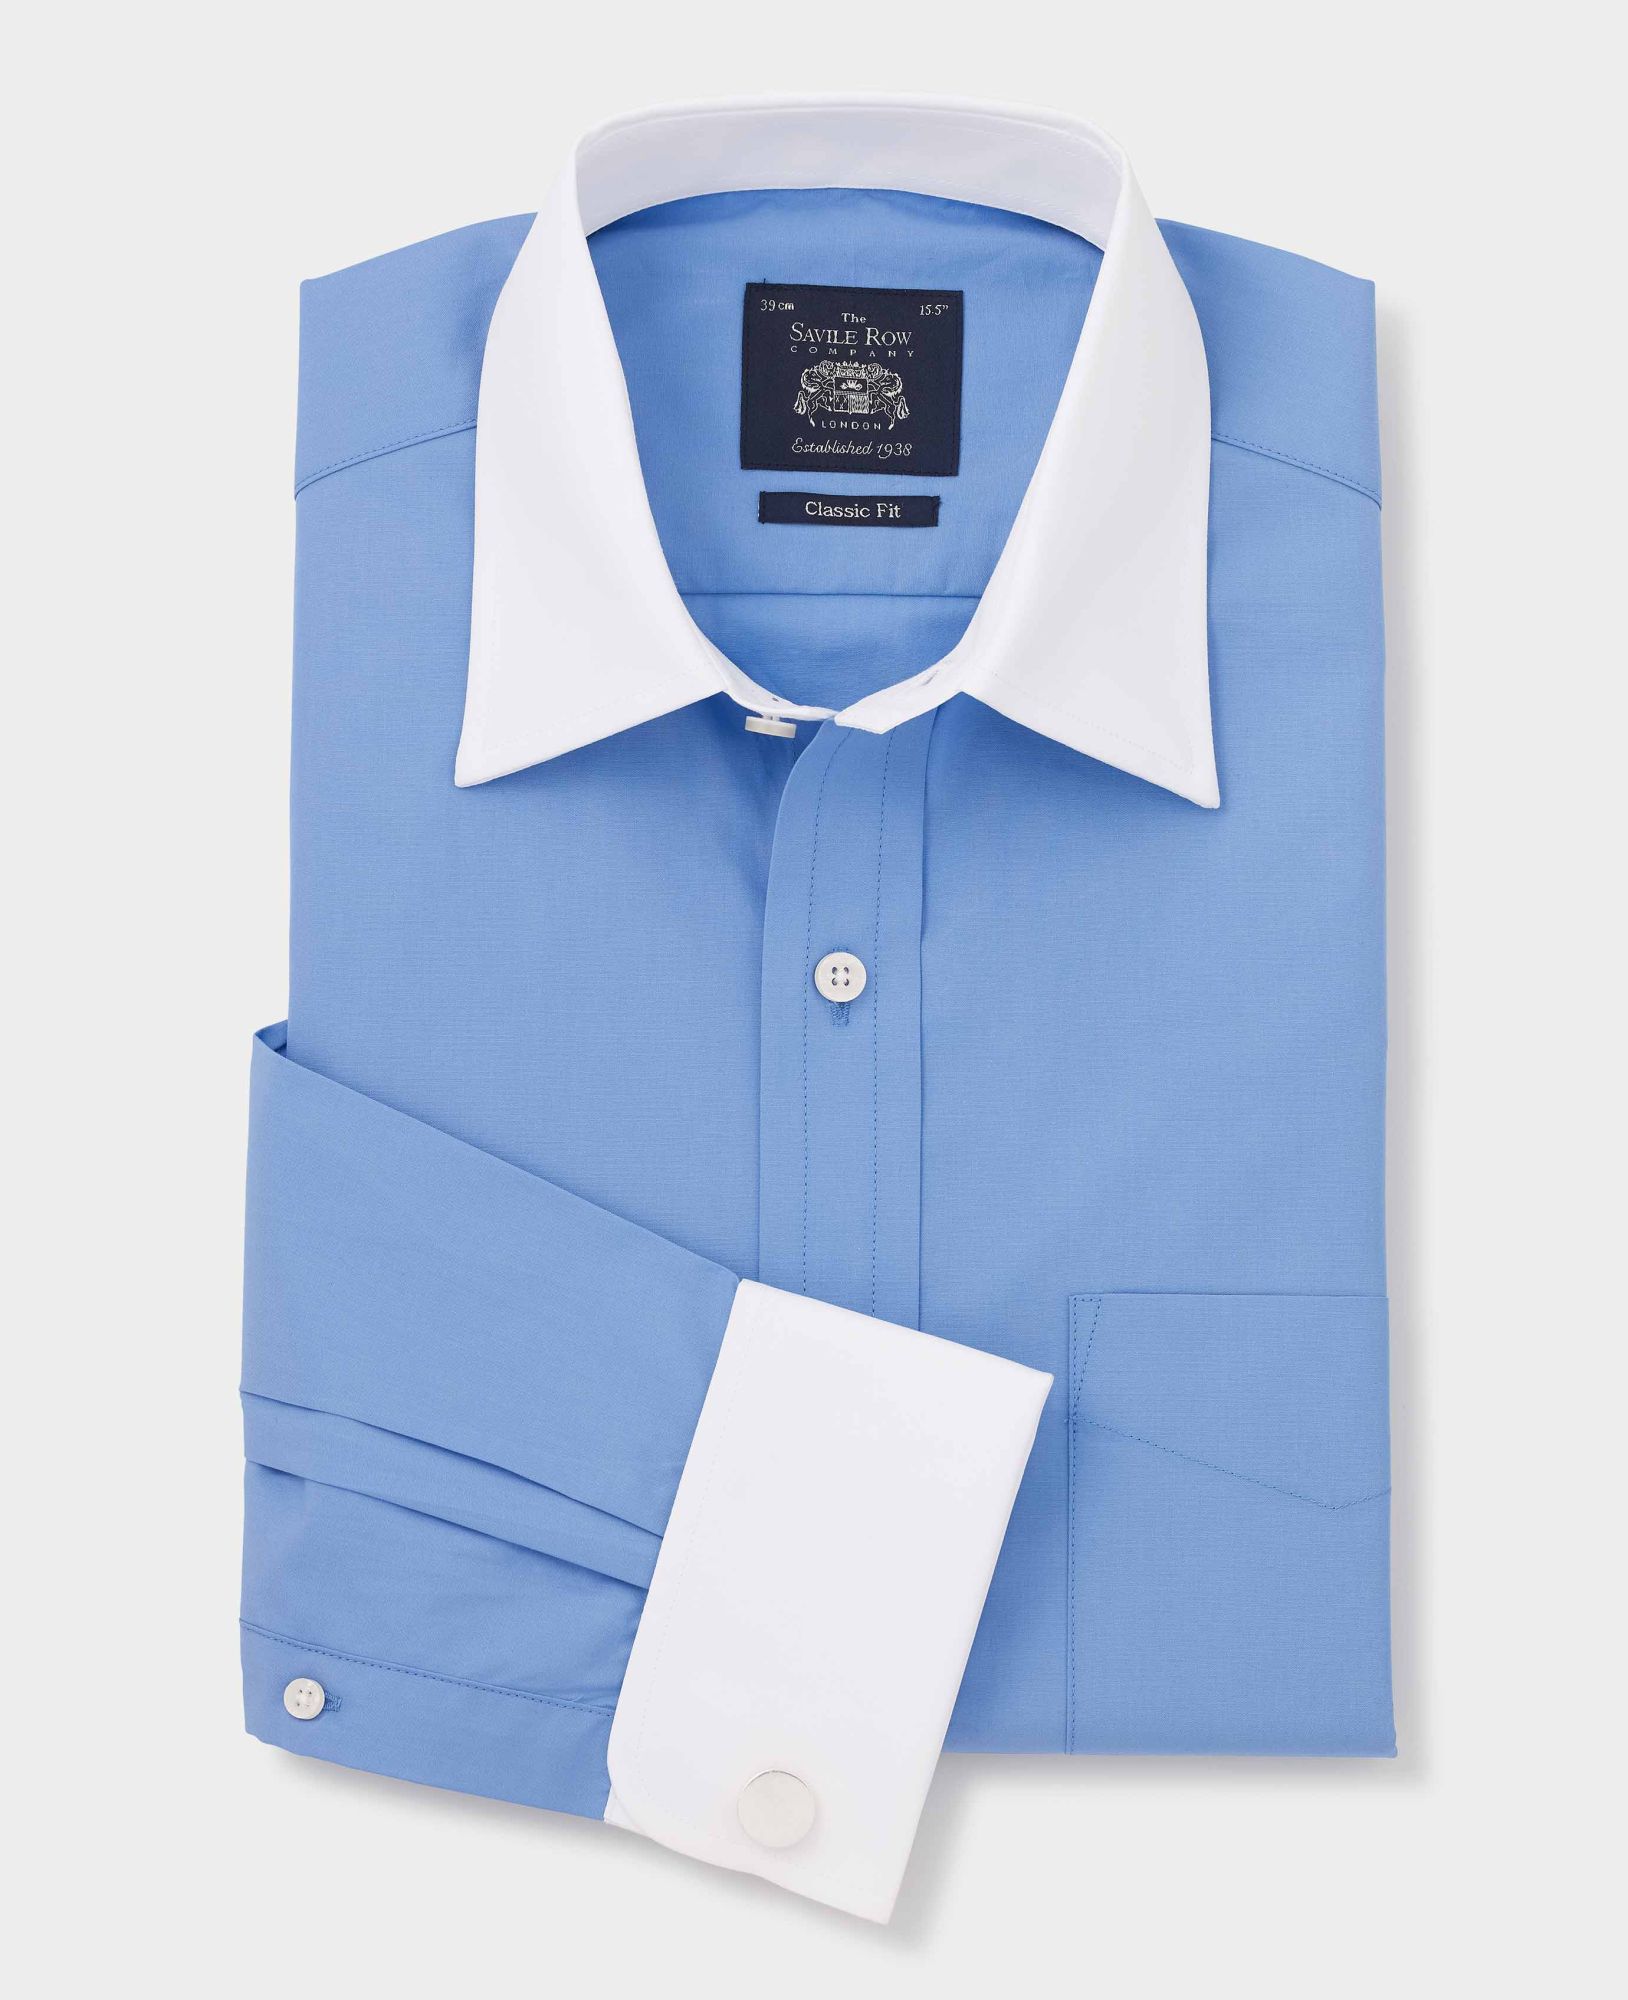 French Blue Classic Fit Shirt With White Collar & Cuffs 17 1/2